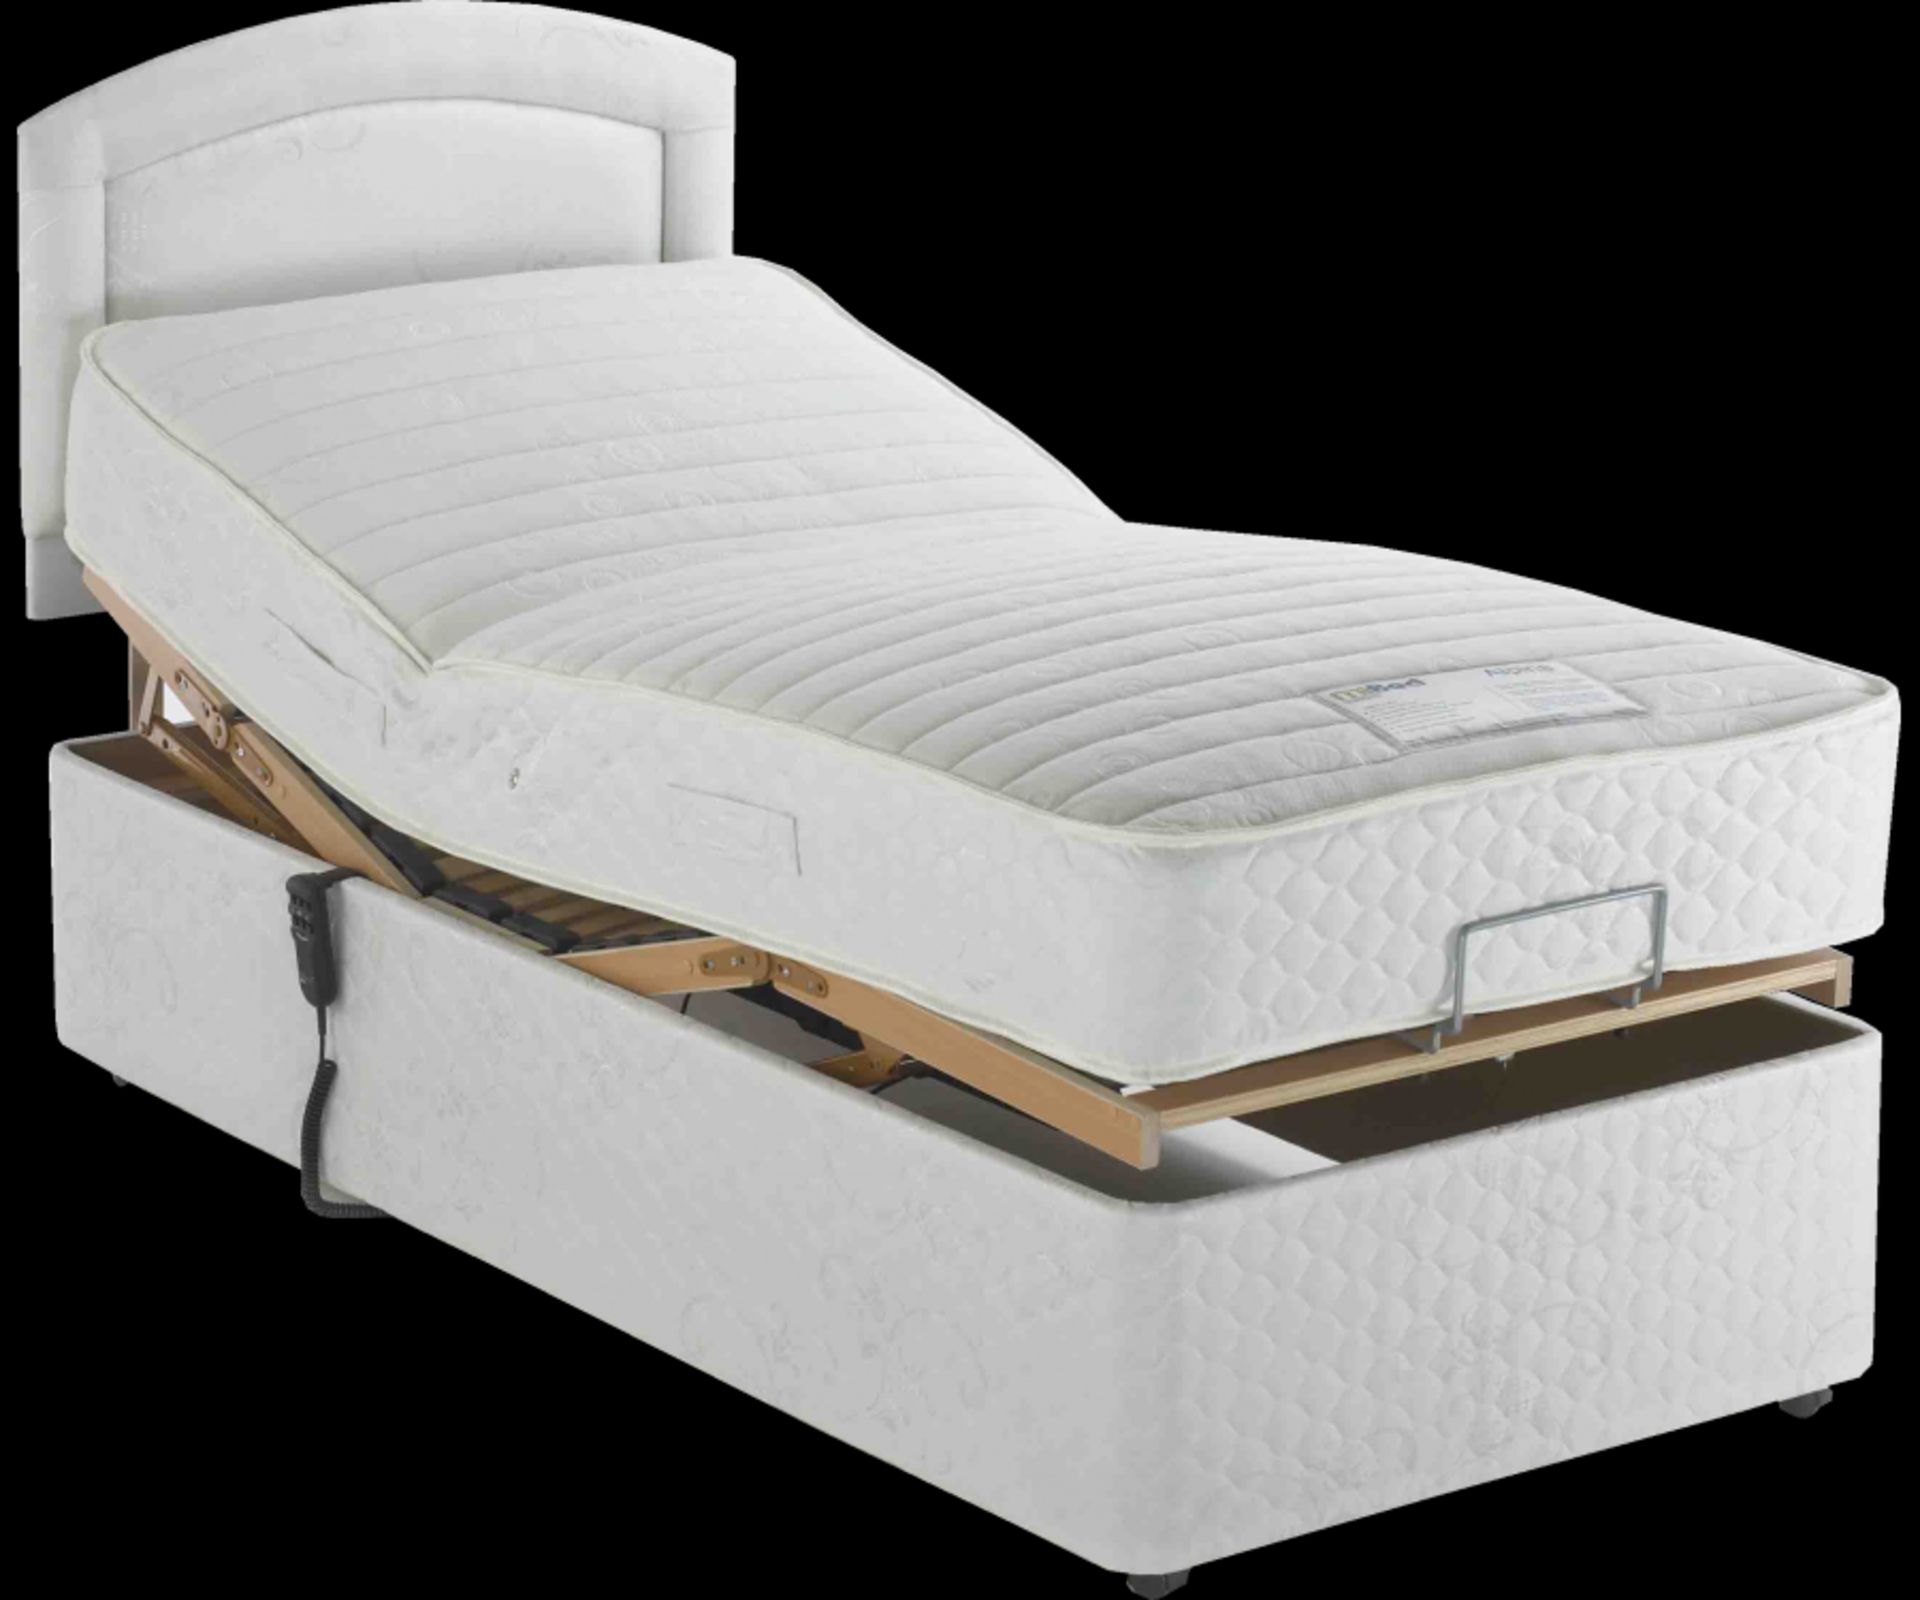 Brand new 3'0 (single) electric adjustable bed with luxury pocket sprung mattress